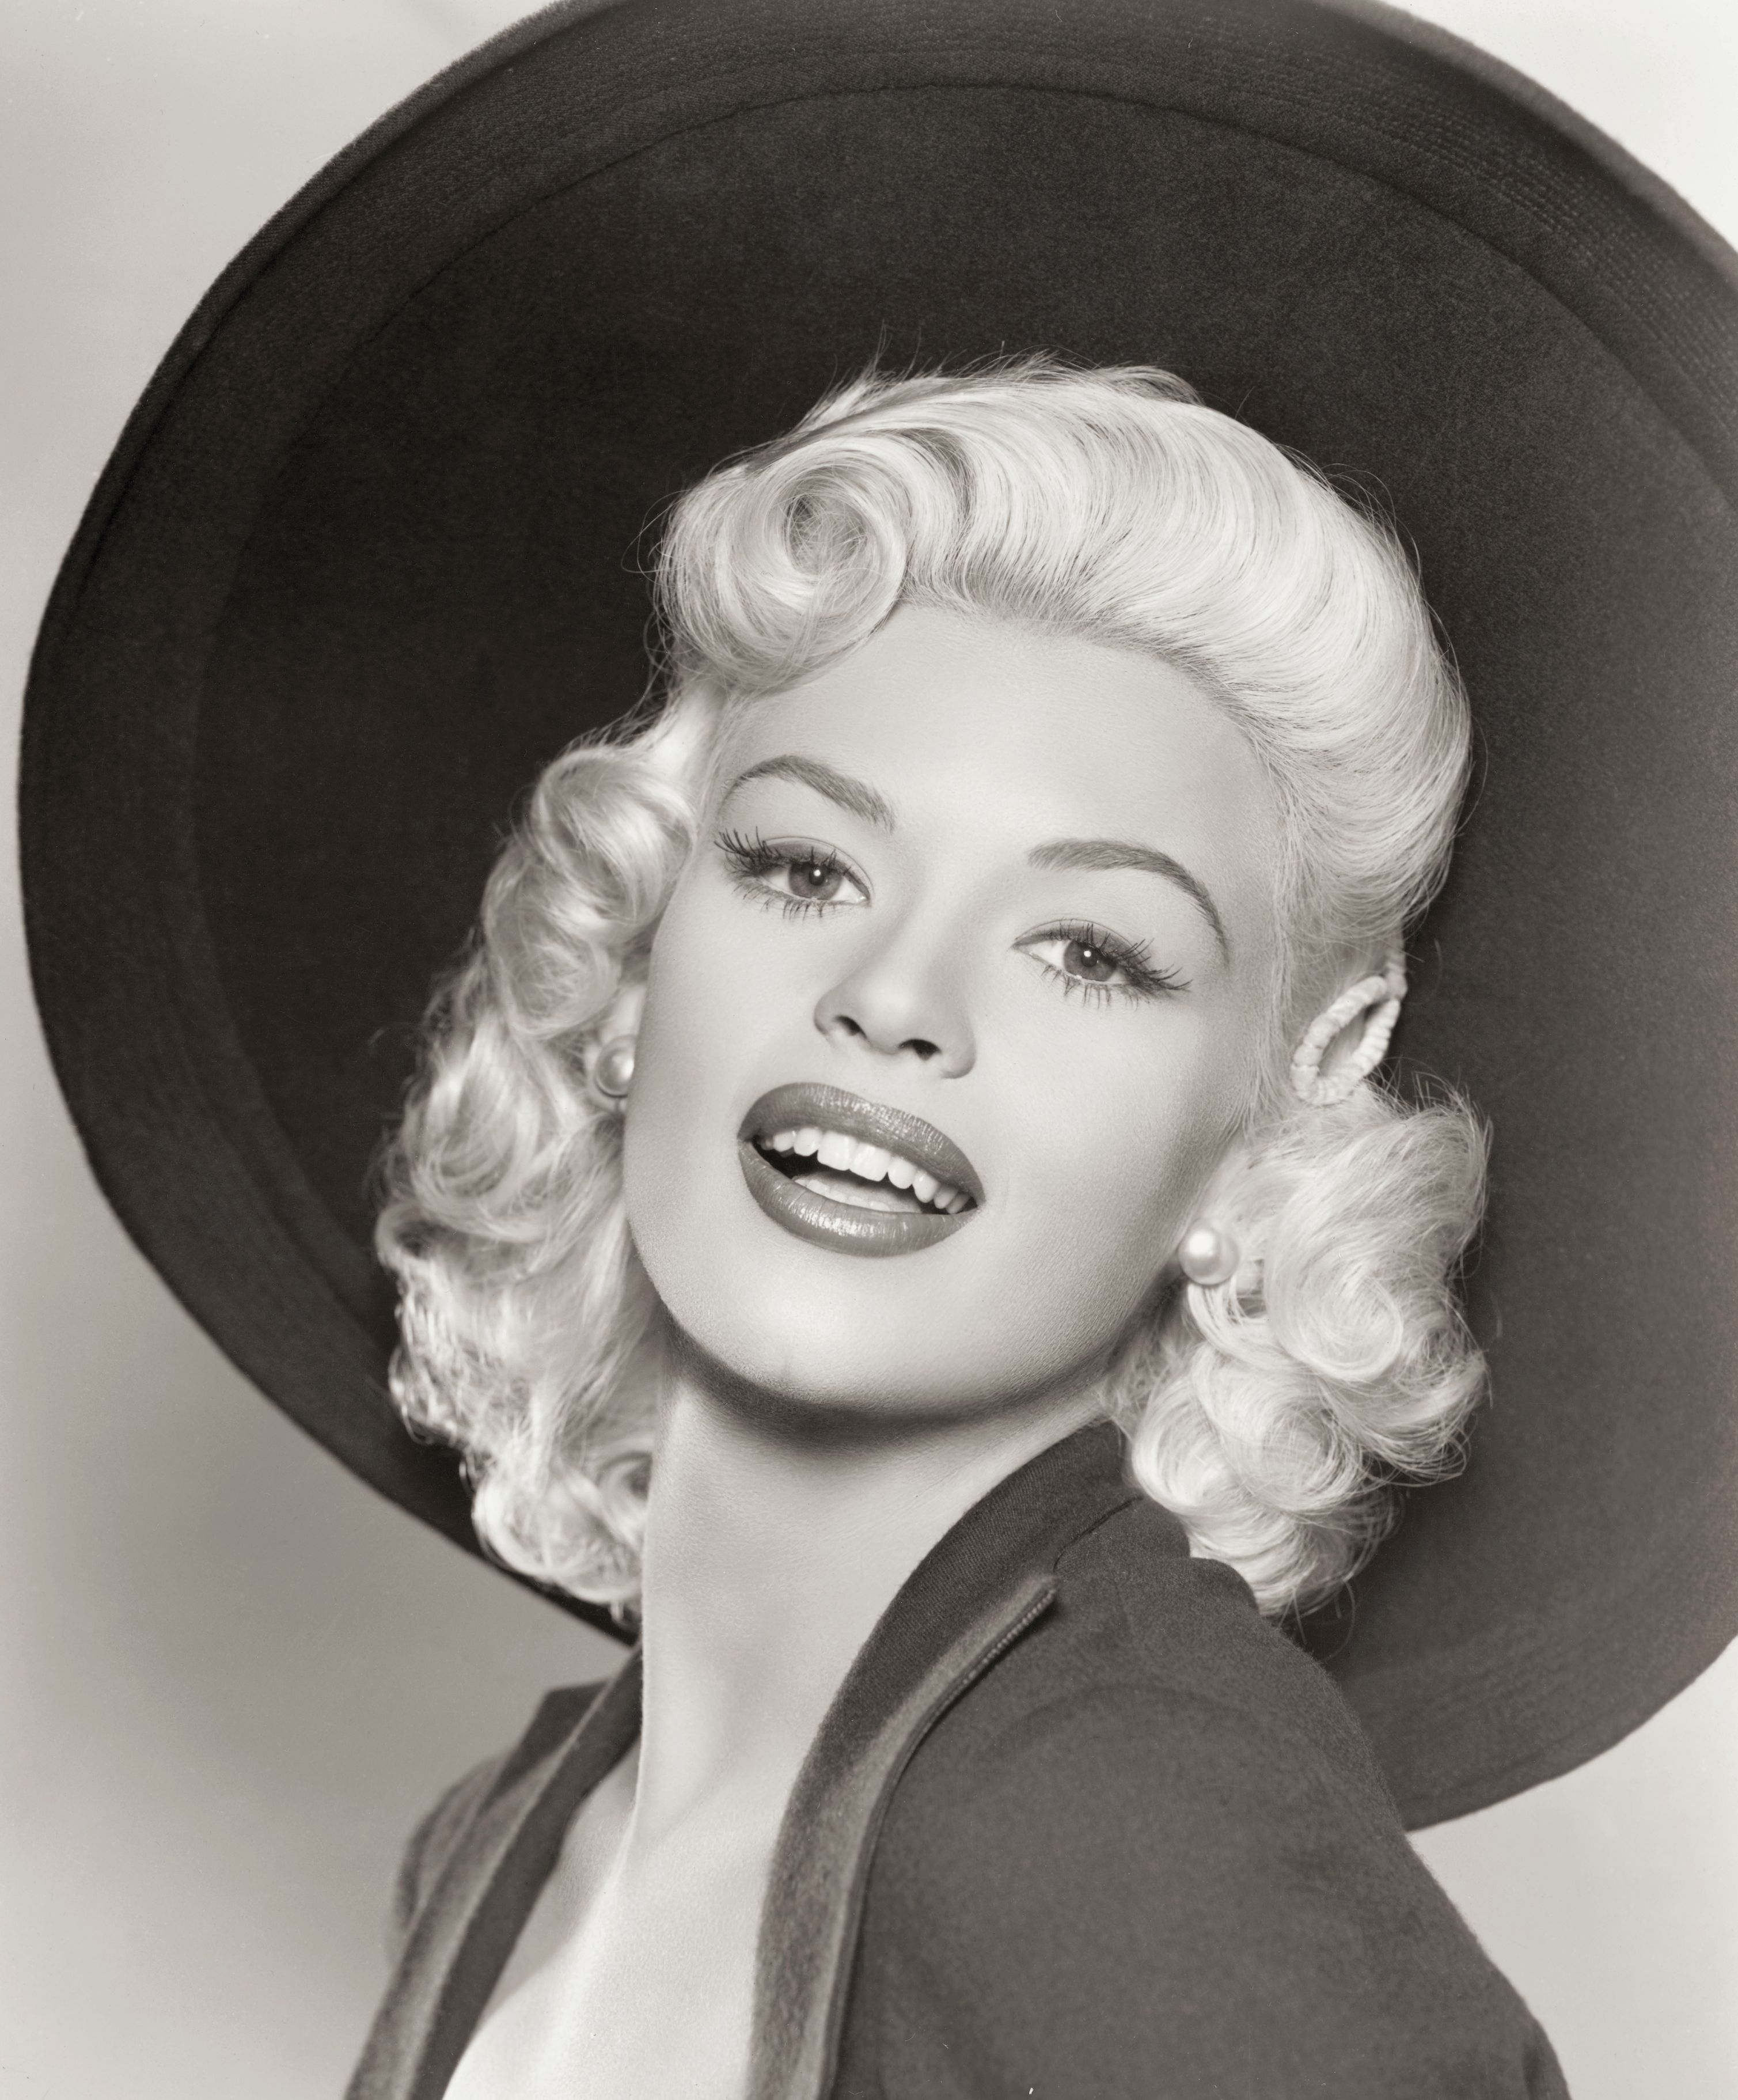 Studio portrait of Jayne Mansfield, who died at the age of 34 in 1967. | Source: Getty Images